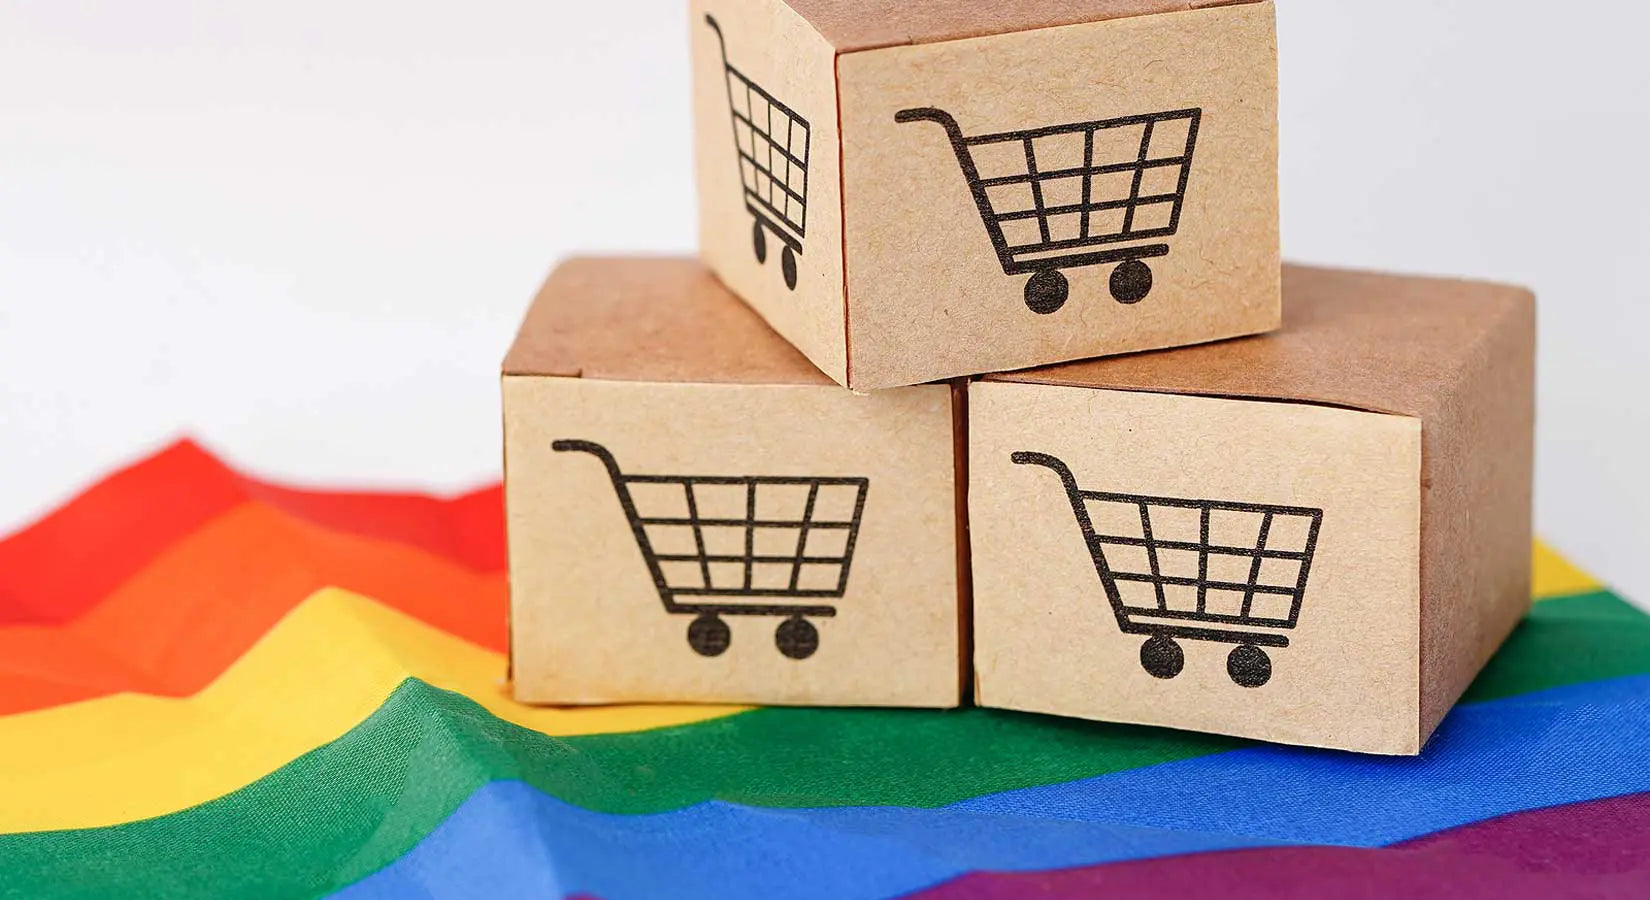 Want to go Gay Pride Shopping?